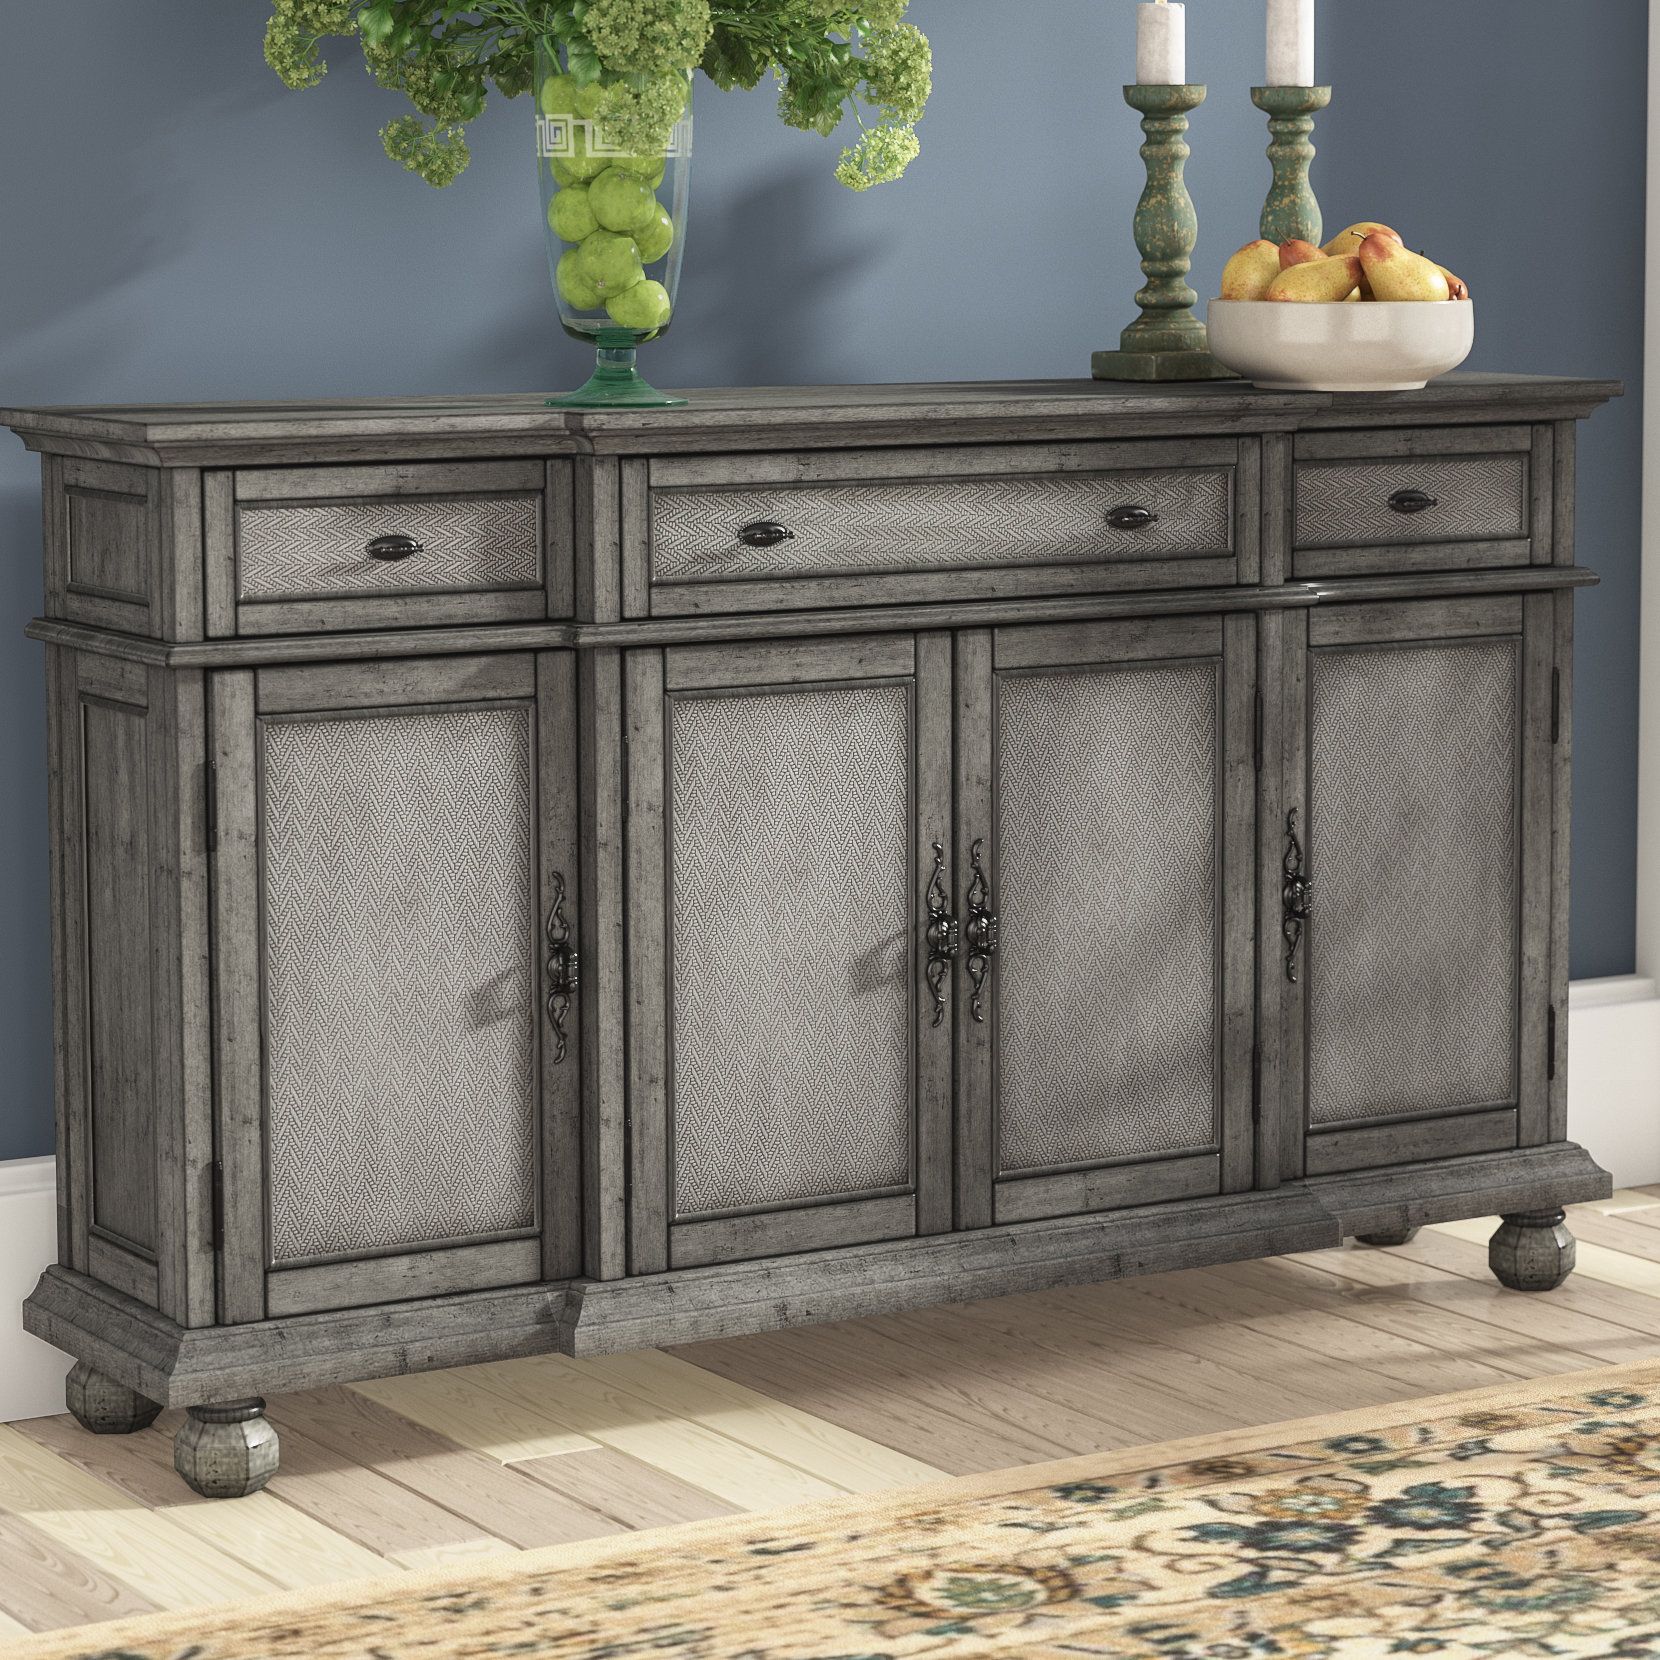 Narrow Credenza | Wayfair Pertaining To Most Popular Caines Credenzas (View 6 of 20)